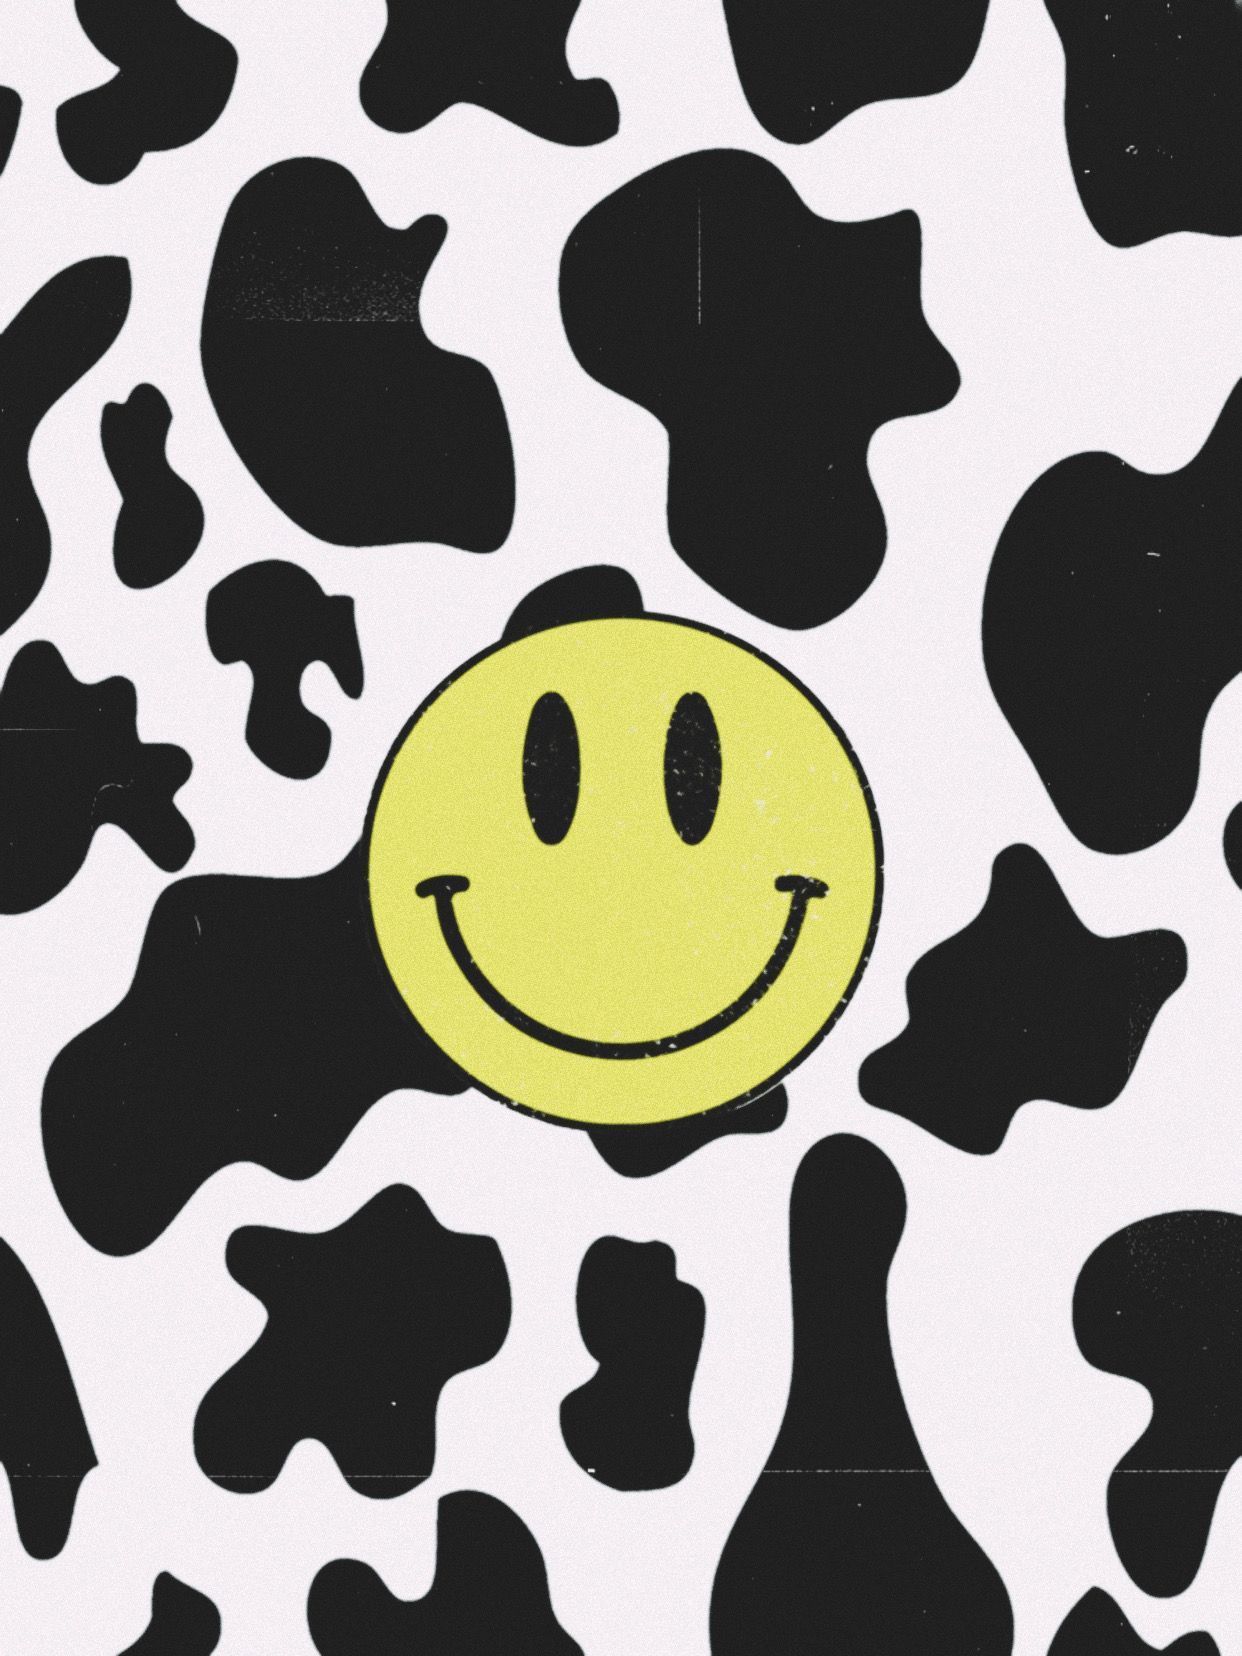 Smiley Face Wallpaper Discover more Culture, Ideogram, Popular, Smiley Face, Standalone wa. Cow print wallpaper, Cute patterns wallpaper, iPhone wallpaper pattern